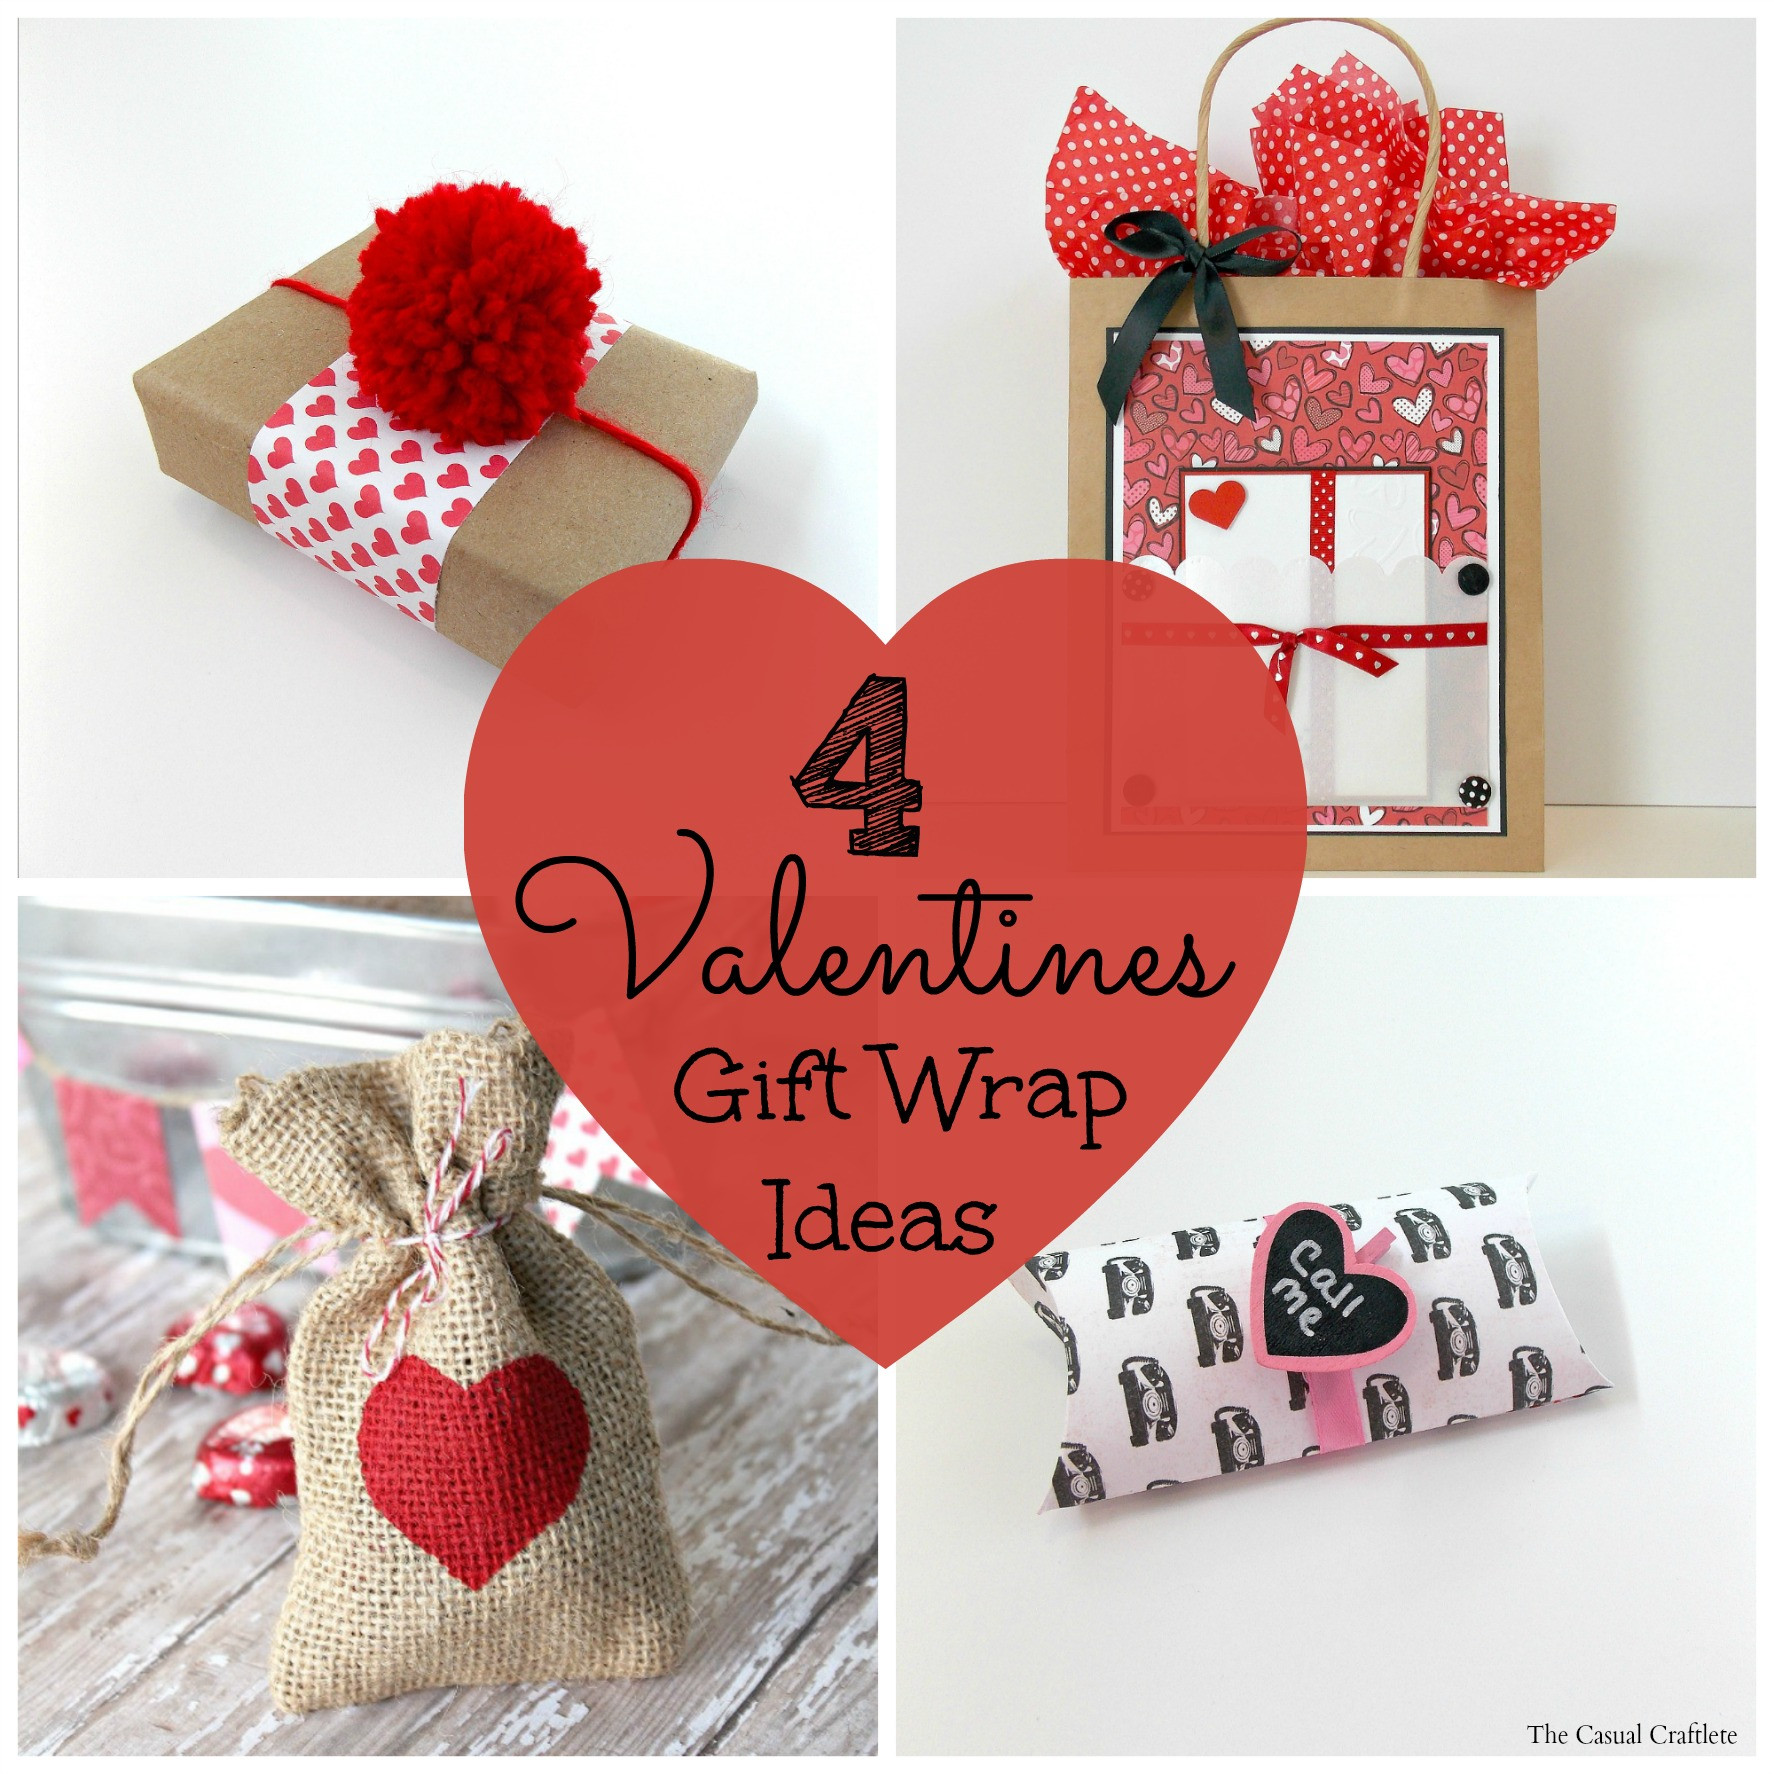 Valentines Gift Wrapping Ideas
 4 Valentines Gift Wrap Ideas Purely Katie